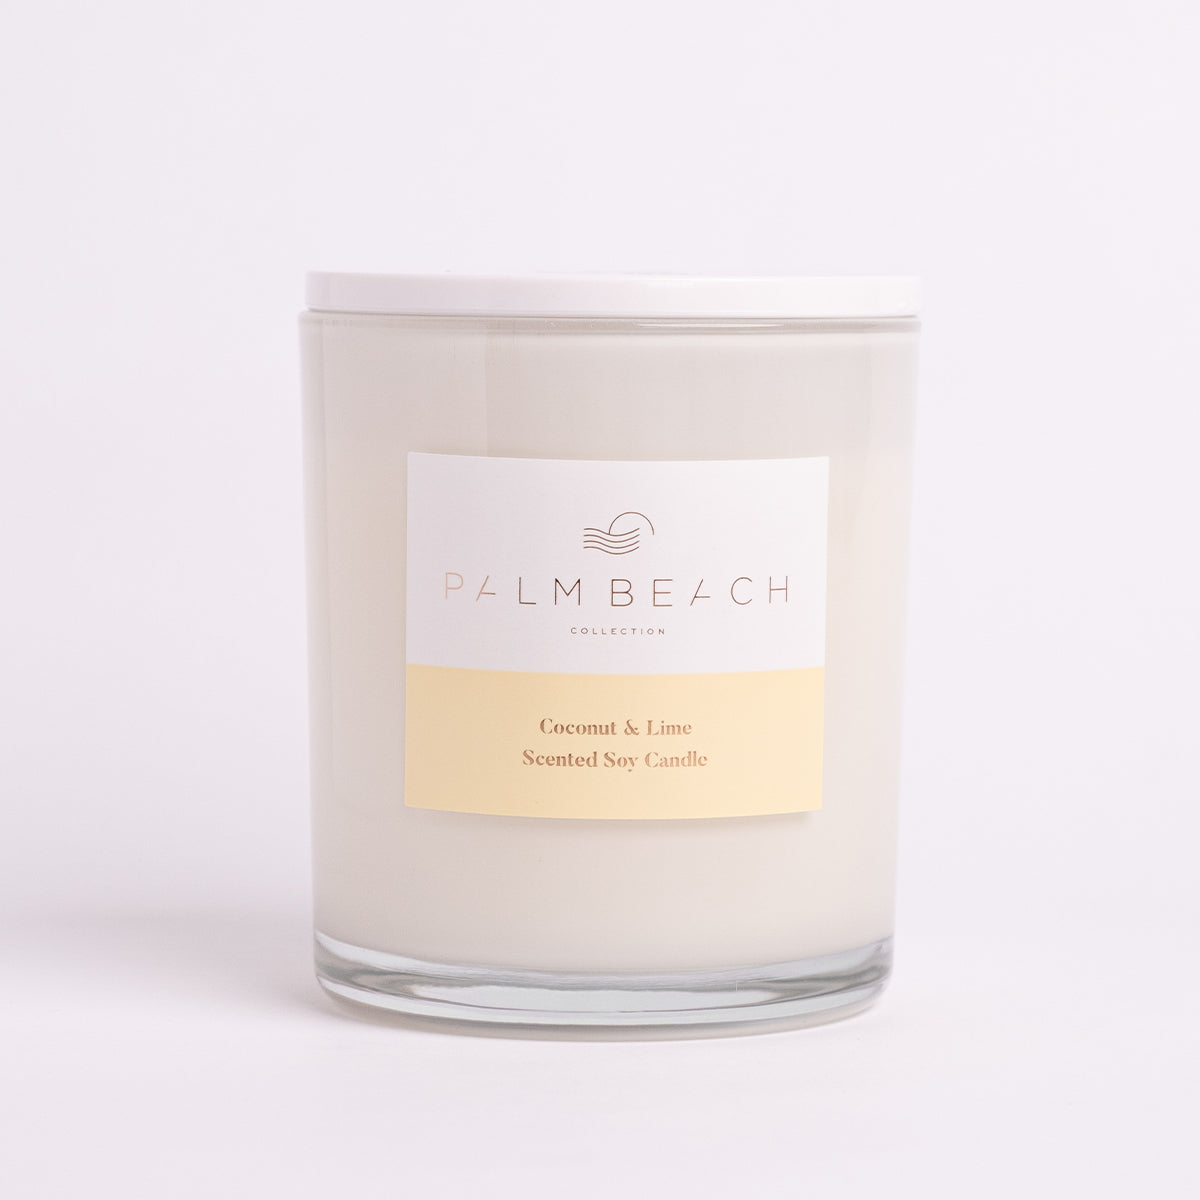 Palm beach Coconut & Lime candle